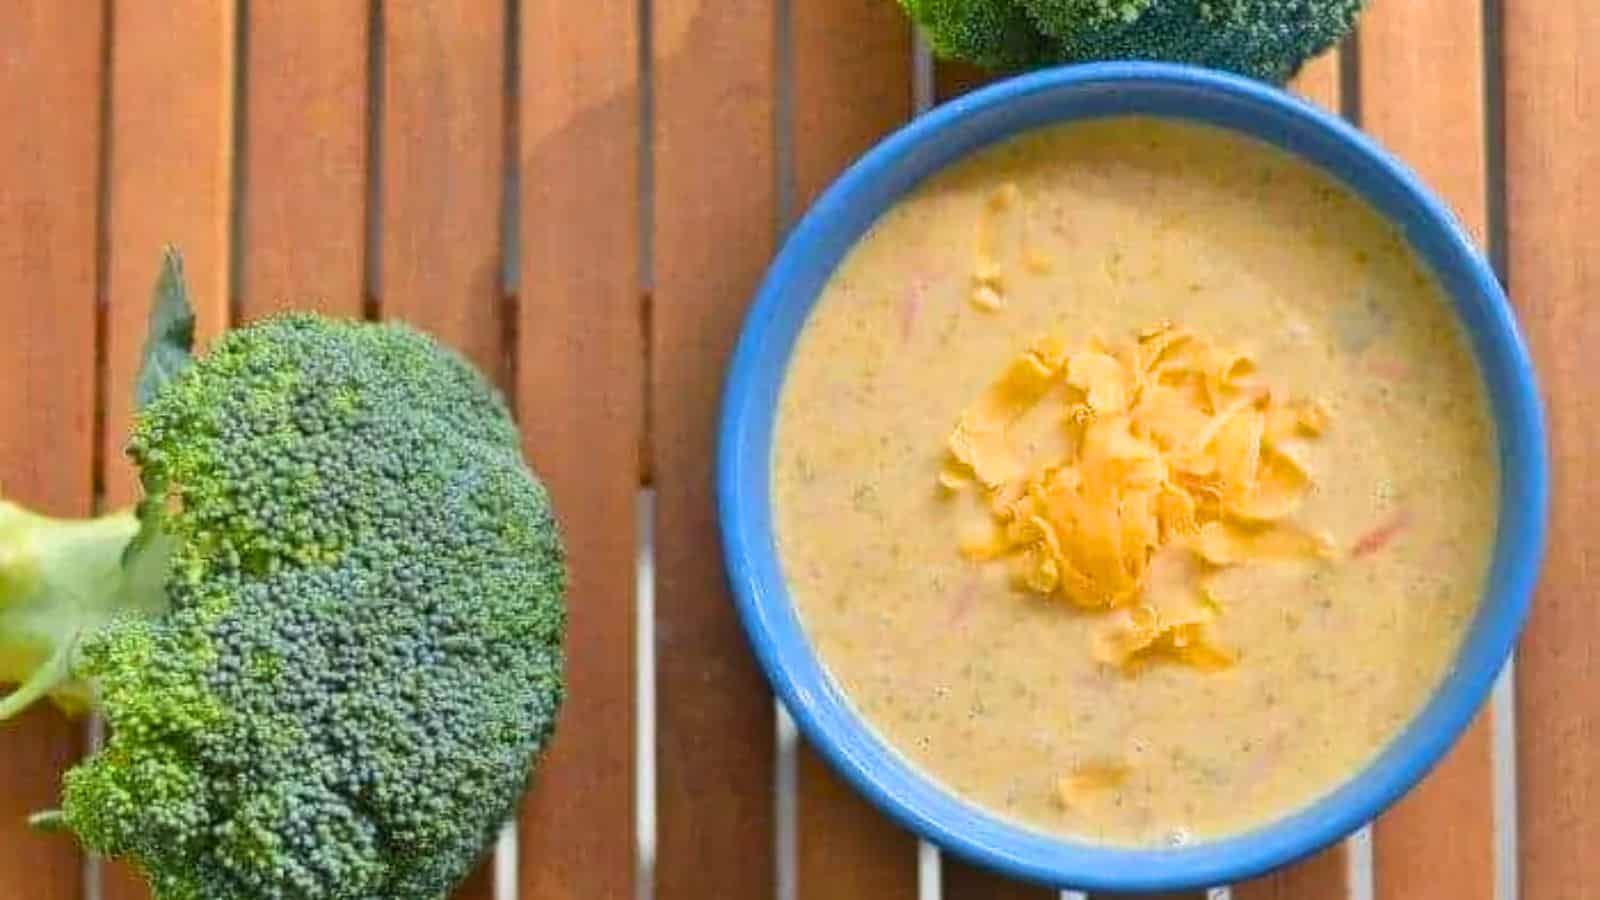 Image shows A bowl of broccoli cheddar soup with broccoli around it.